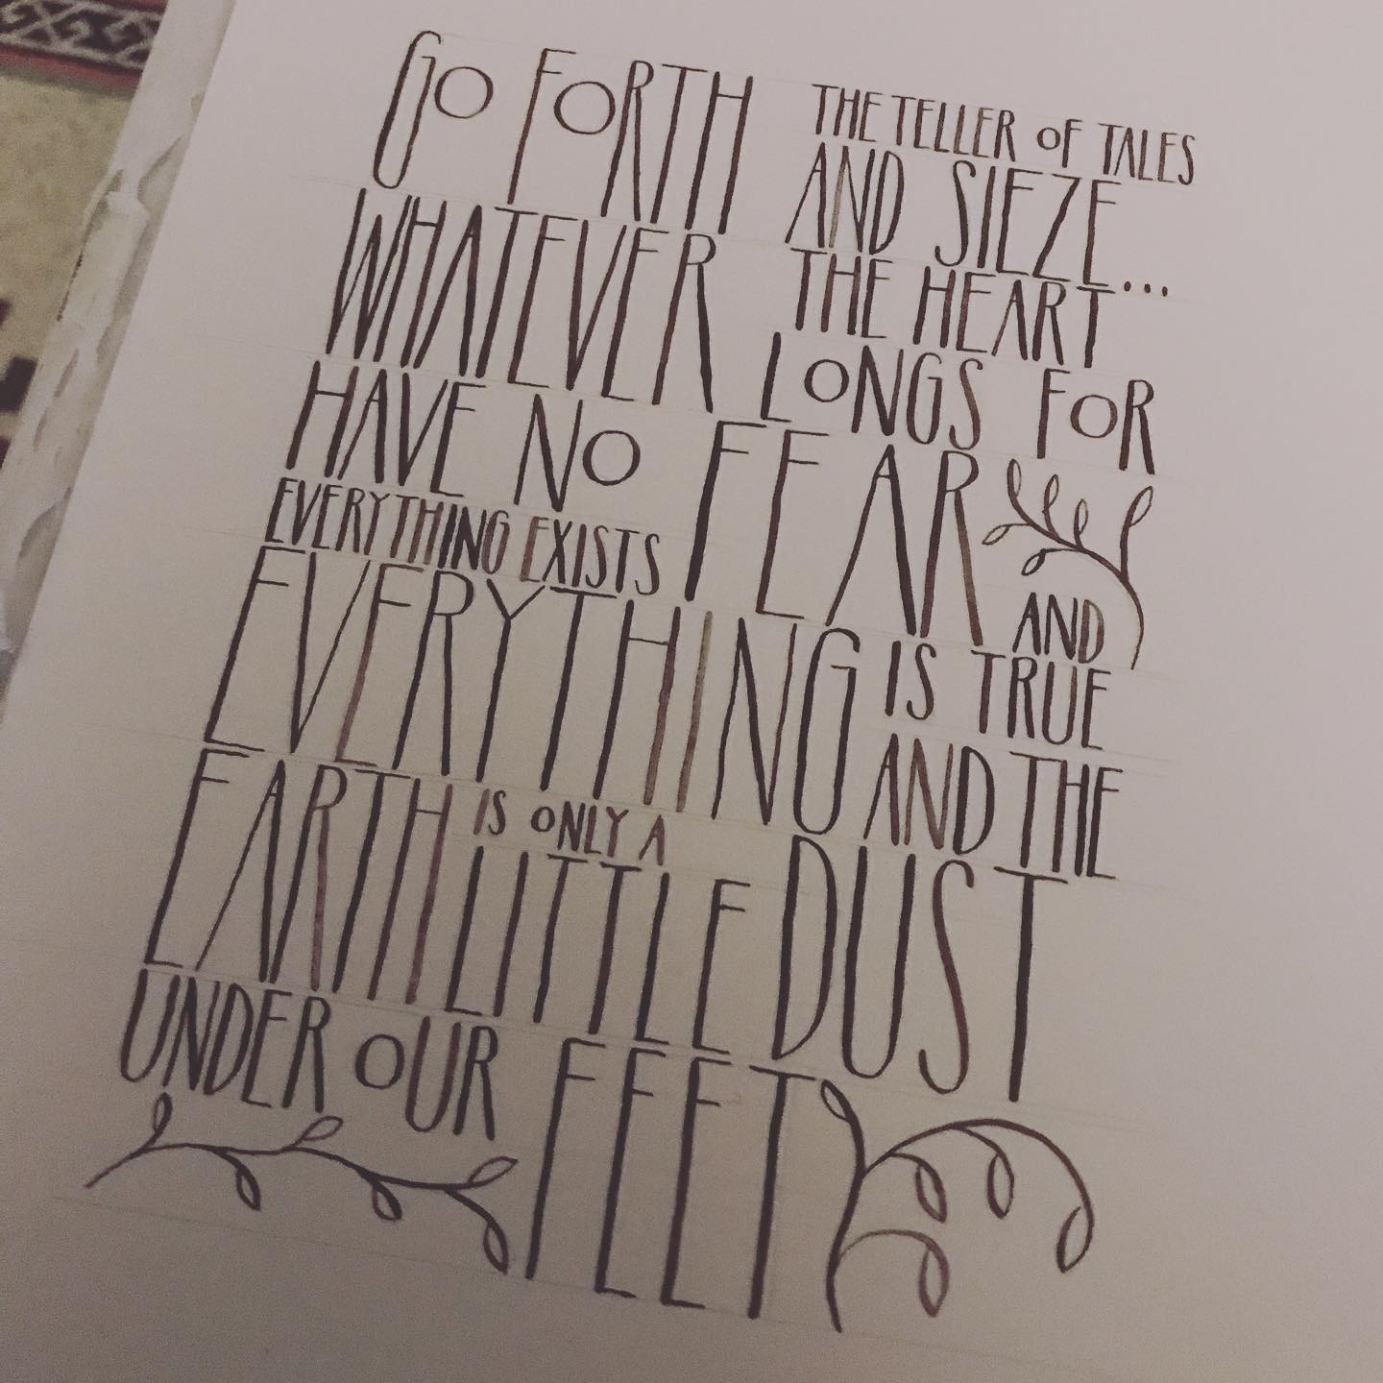 Hand drawn lettering and Calligraphy